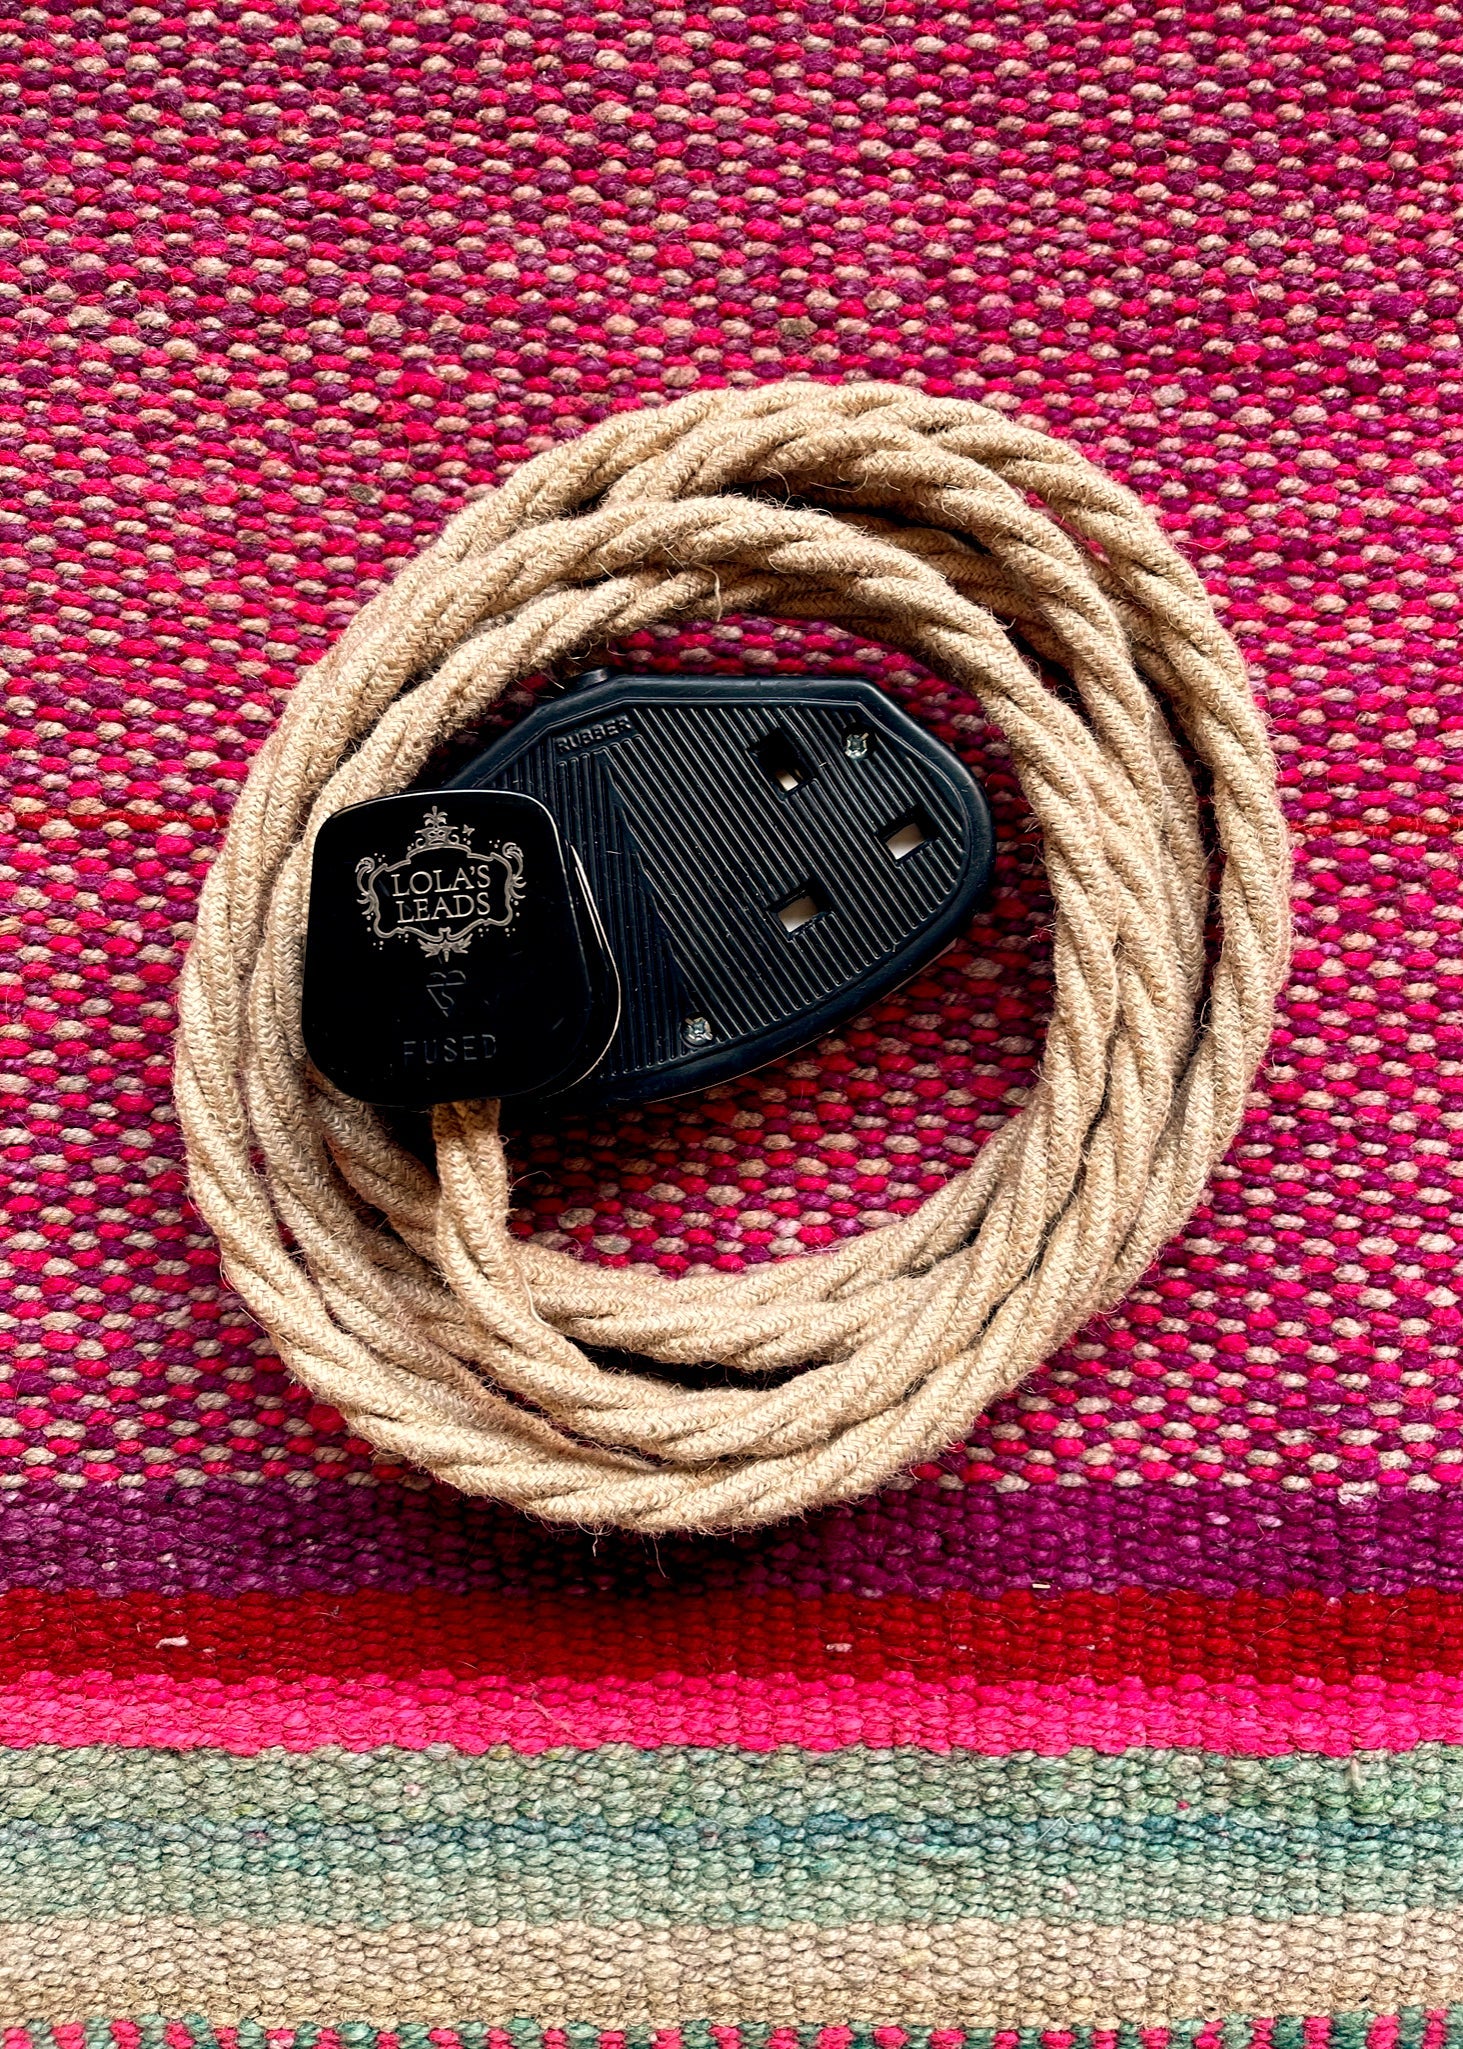 Jute - Lola's Leads Fabric Extension Cable